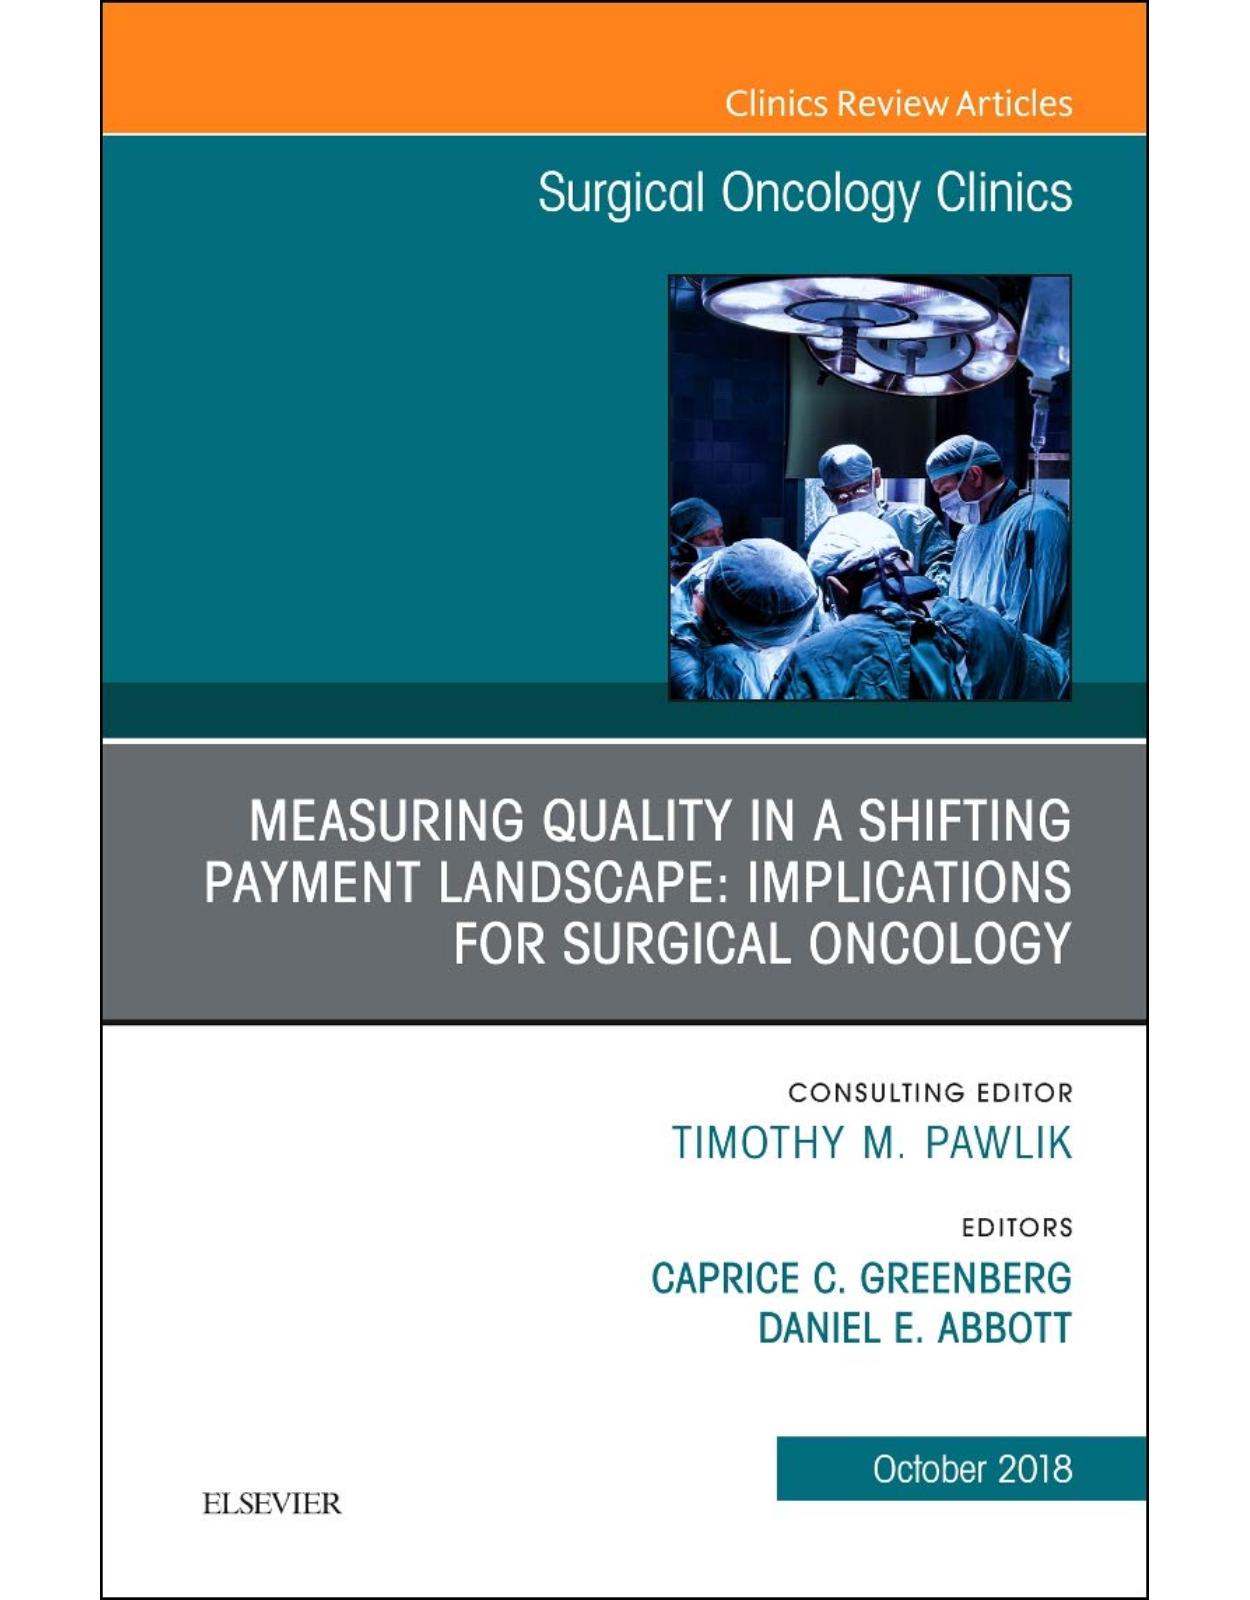 Measuring Quality in a Shifting Payment Landscape: Implications for Surgical Oncology, An Issue of Surgical Oncology Clinics of North America, Volume 27-4